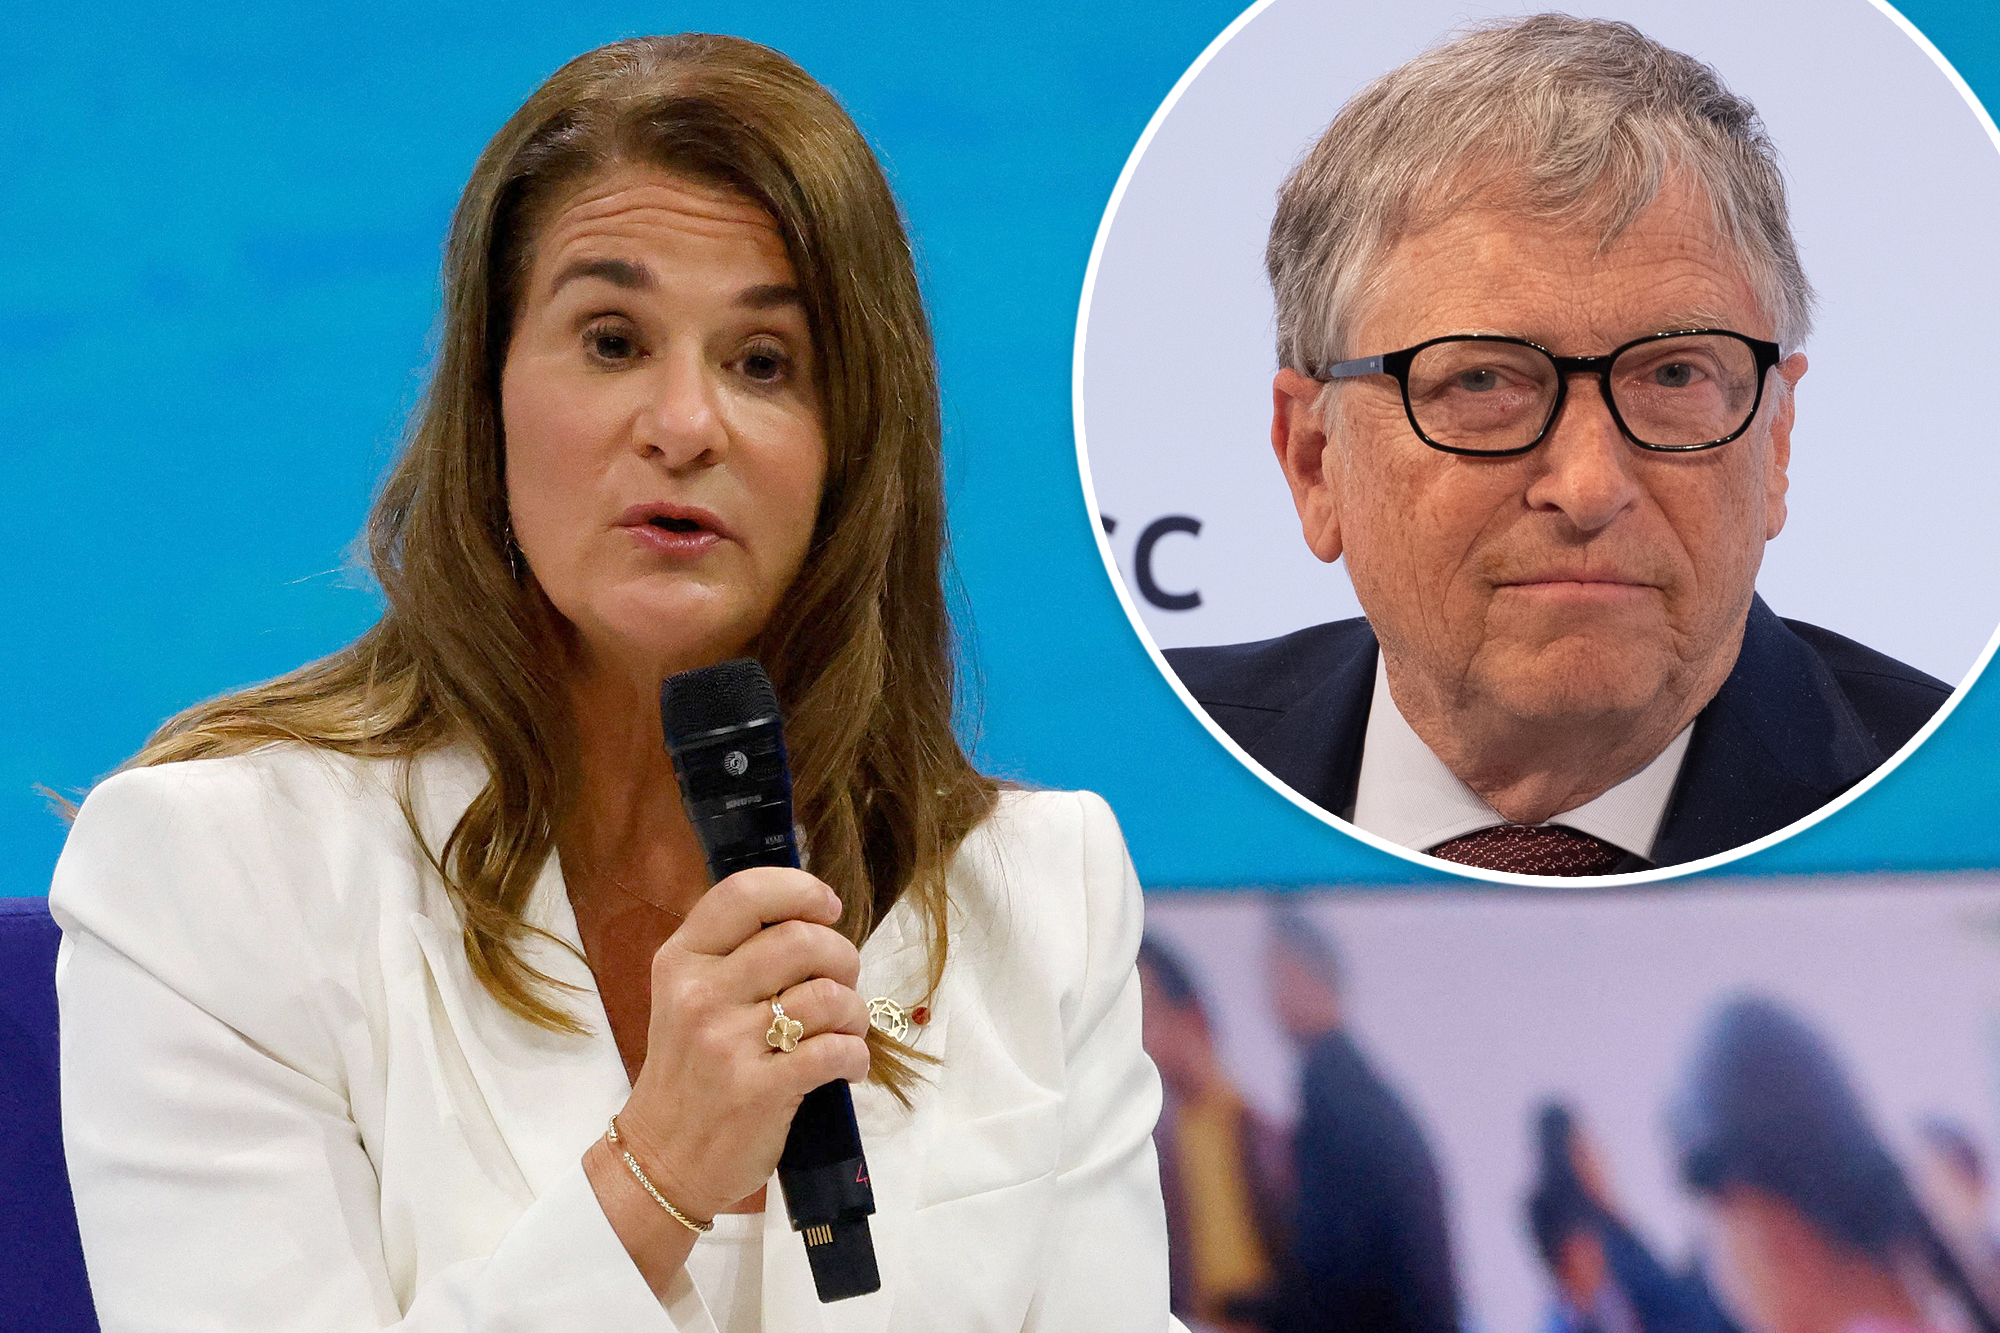 Bill Gates' ex-wife shares the ultimate pain that only anyone who has ever loved too much can understand: 